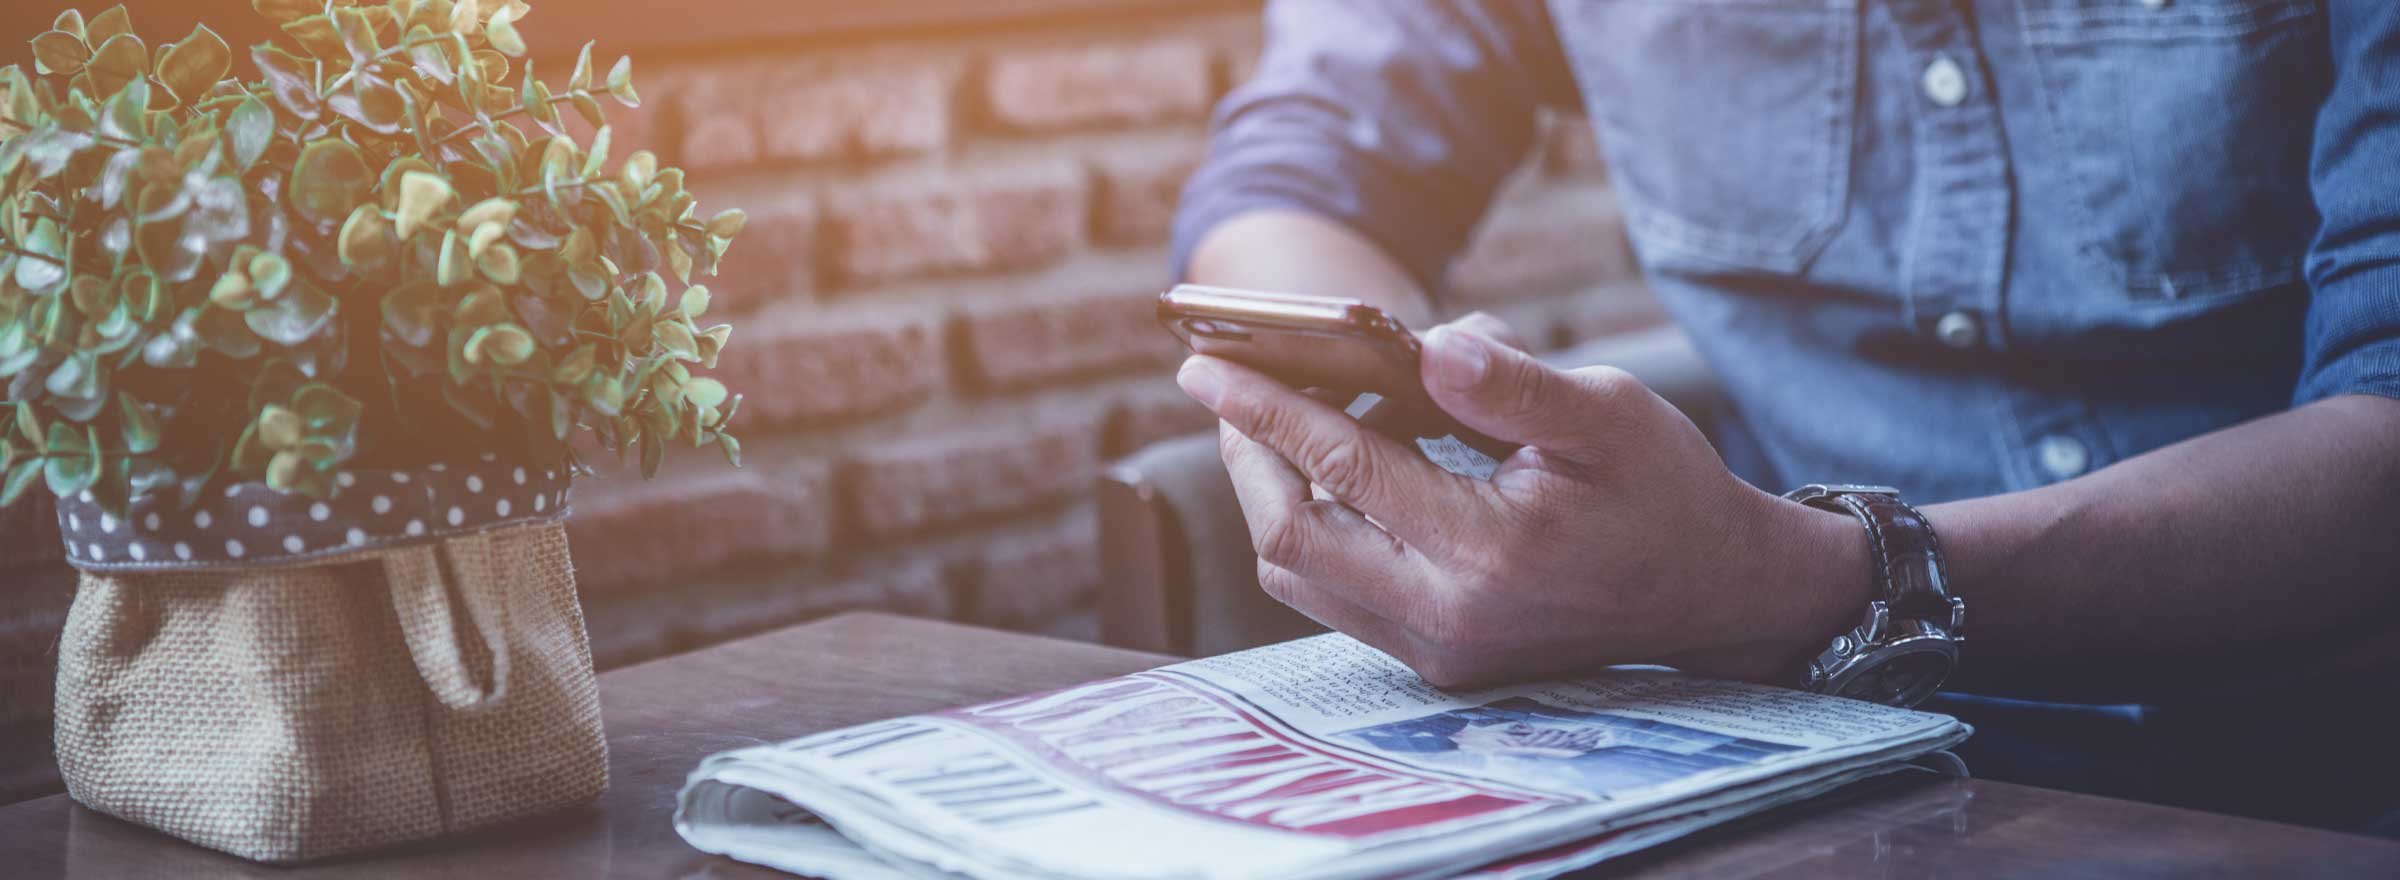 man sitting at a table with a newspaper and a smartphone